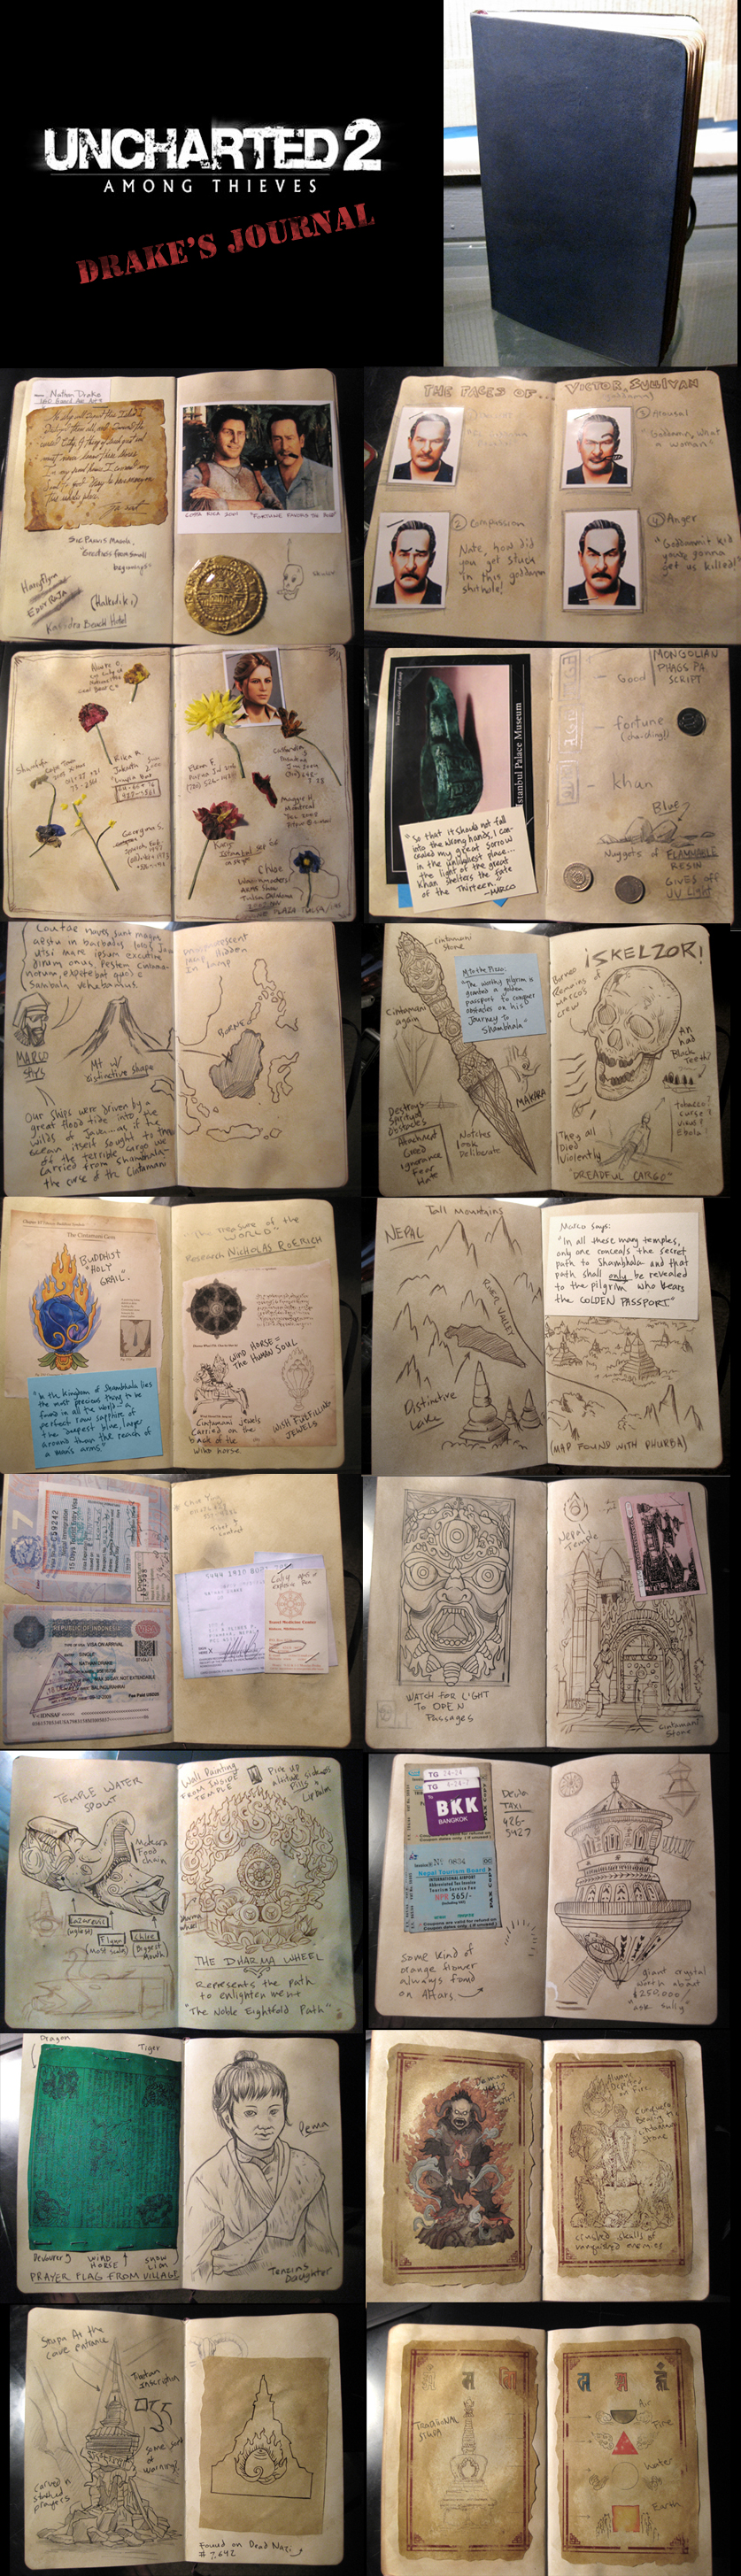 Uncharted Drake's Journal replica